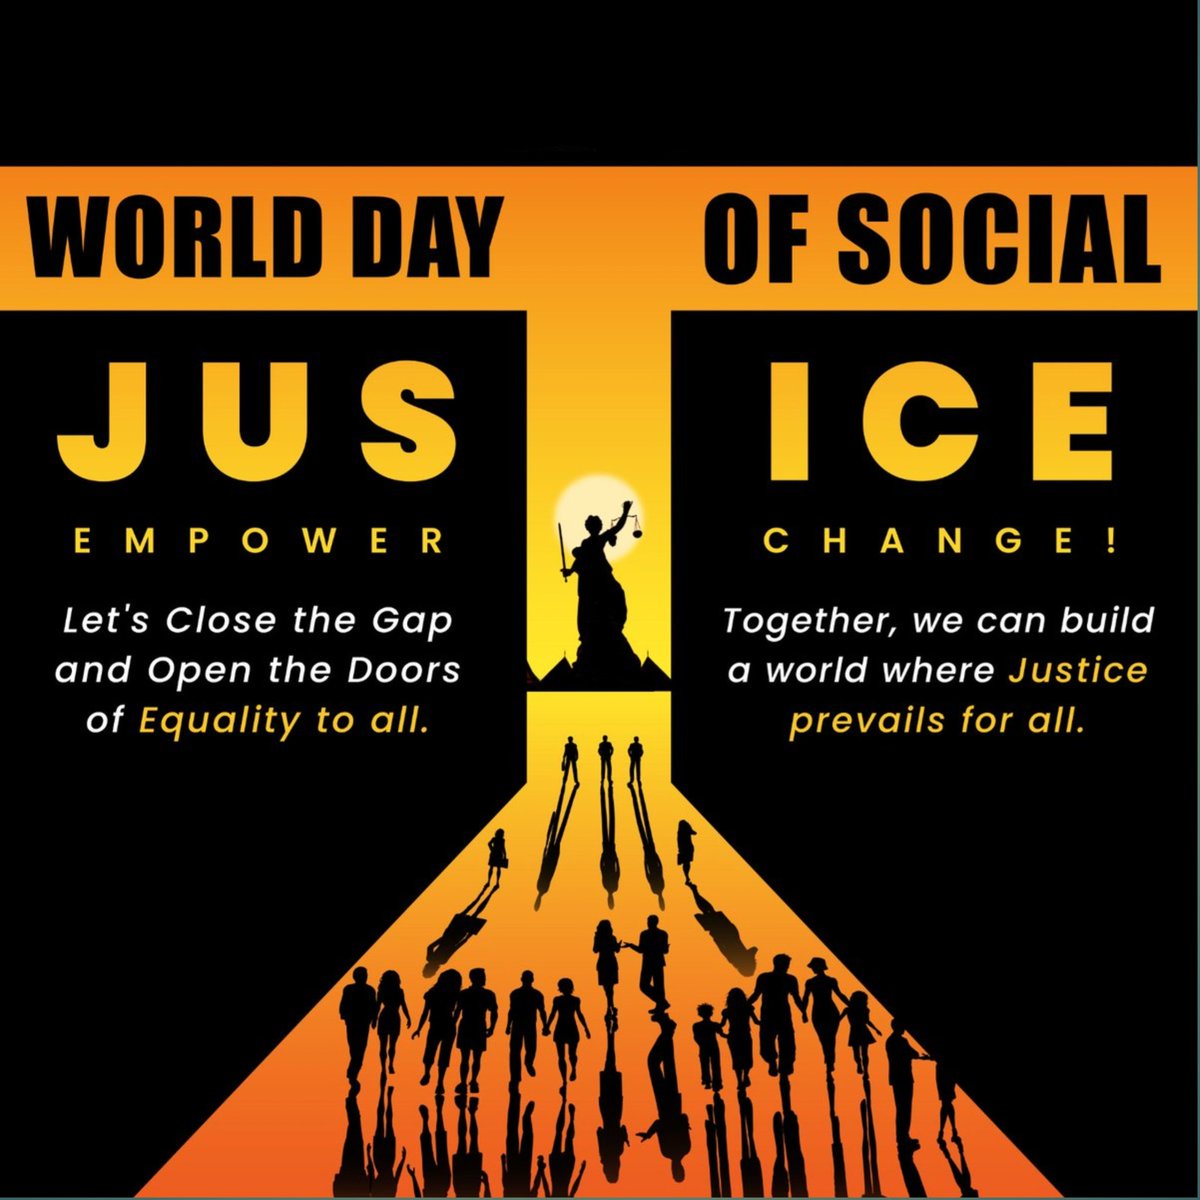 Equality is not just a goal; it's a responsibility we all share. Happy World Day of Social Justice! Let's strive for a world where justice and equality prevail.

#worldsocialjusticeday #equalityforall #TogetherForJustice #globalresponsibility